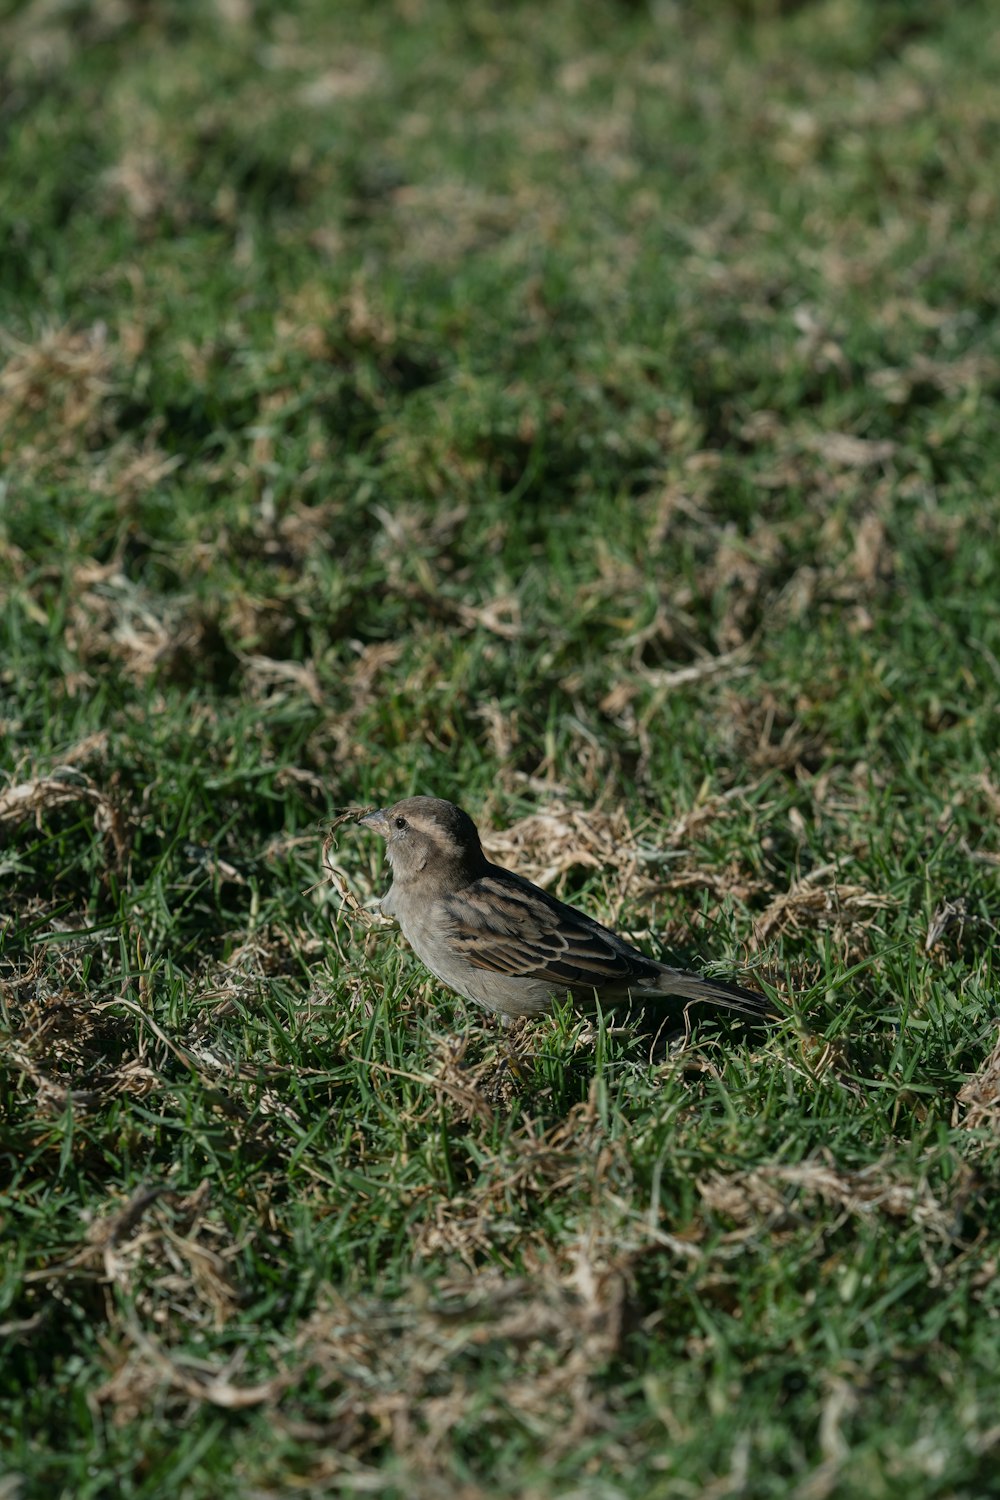 a small bird sitting on the ground in the grass